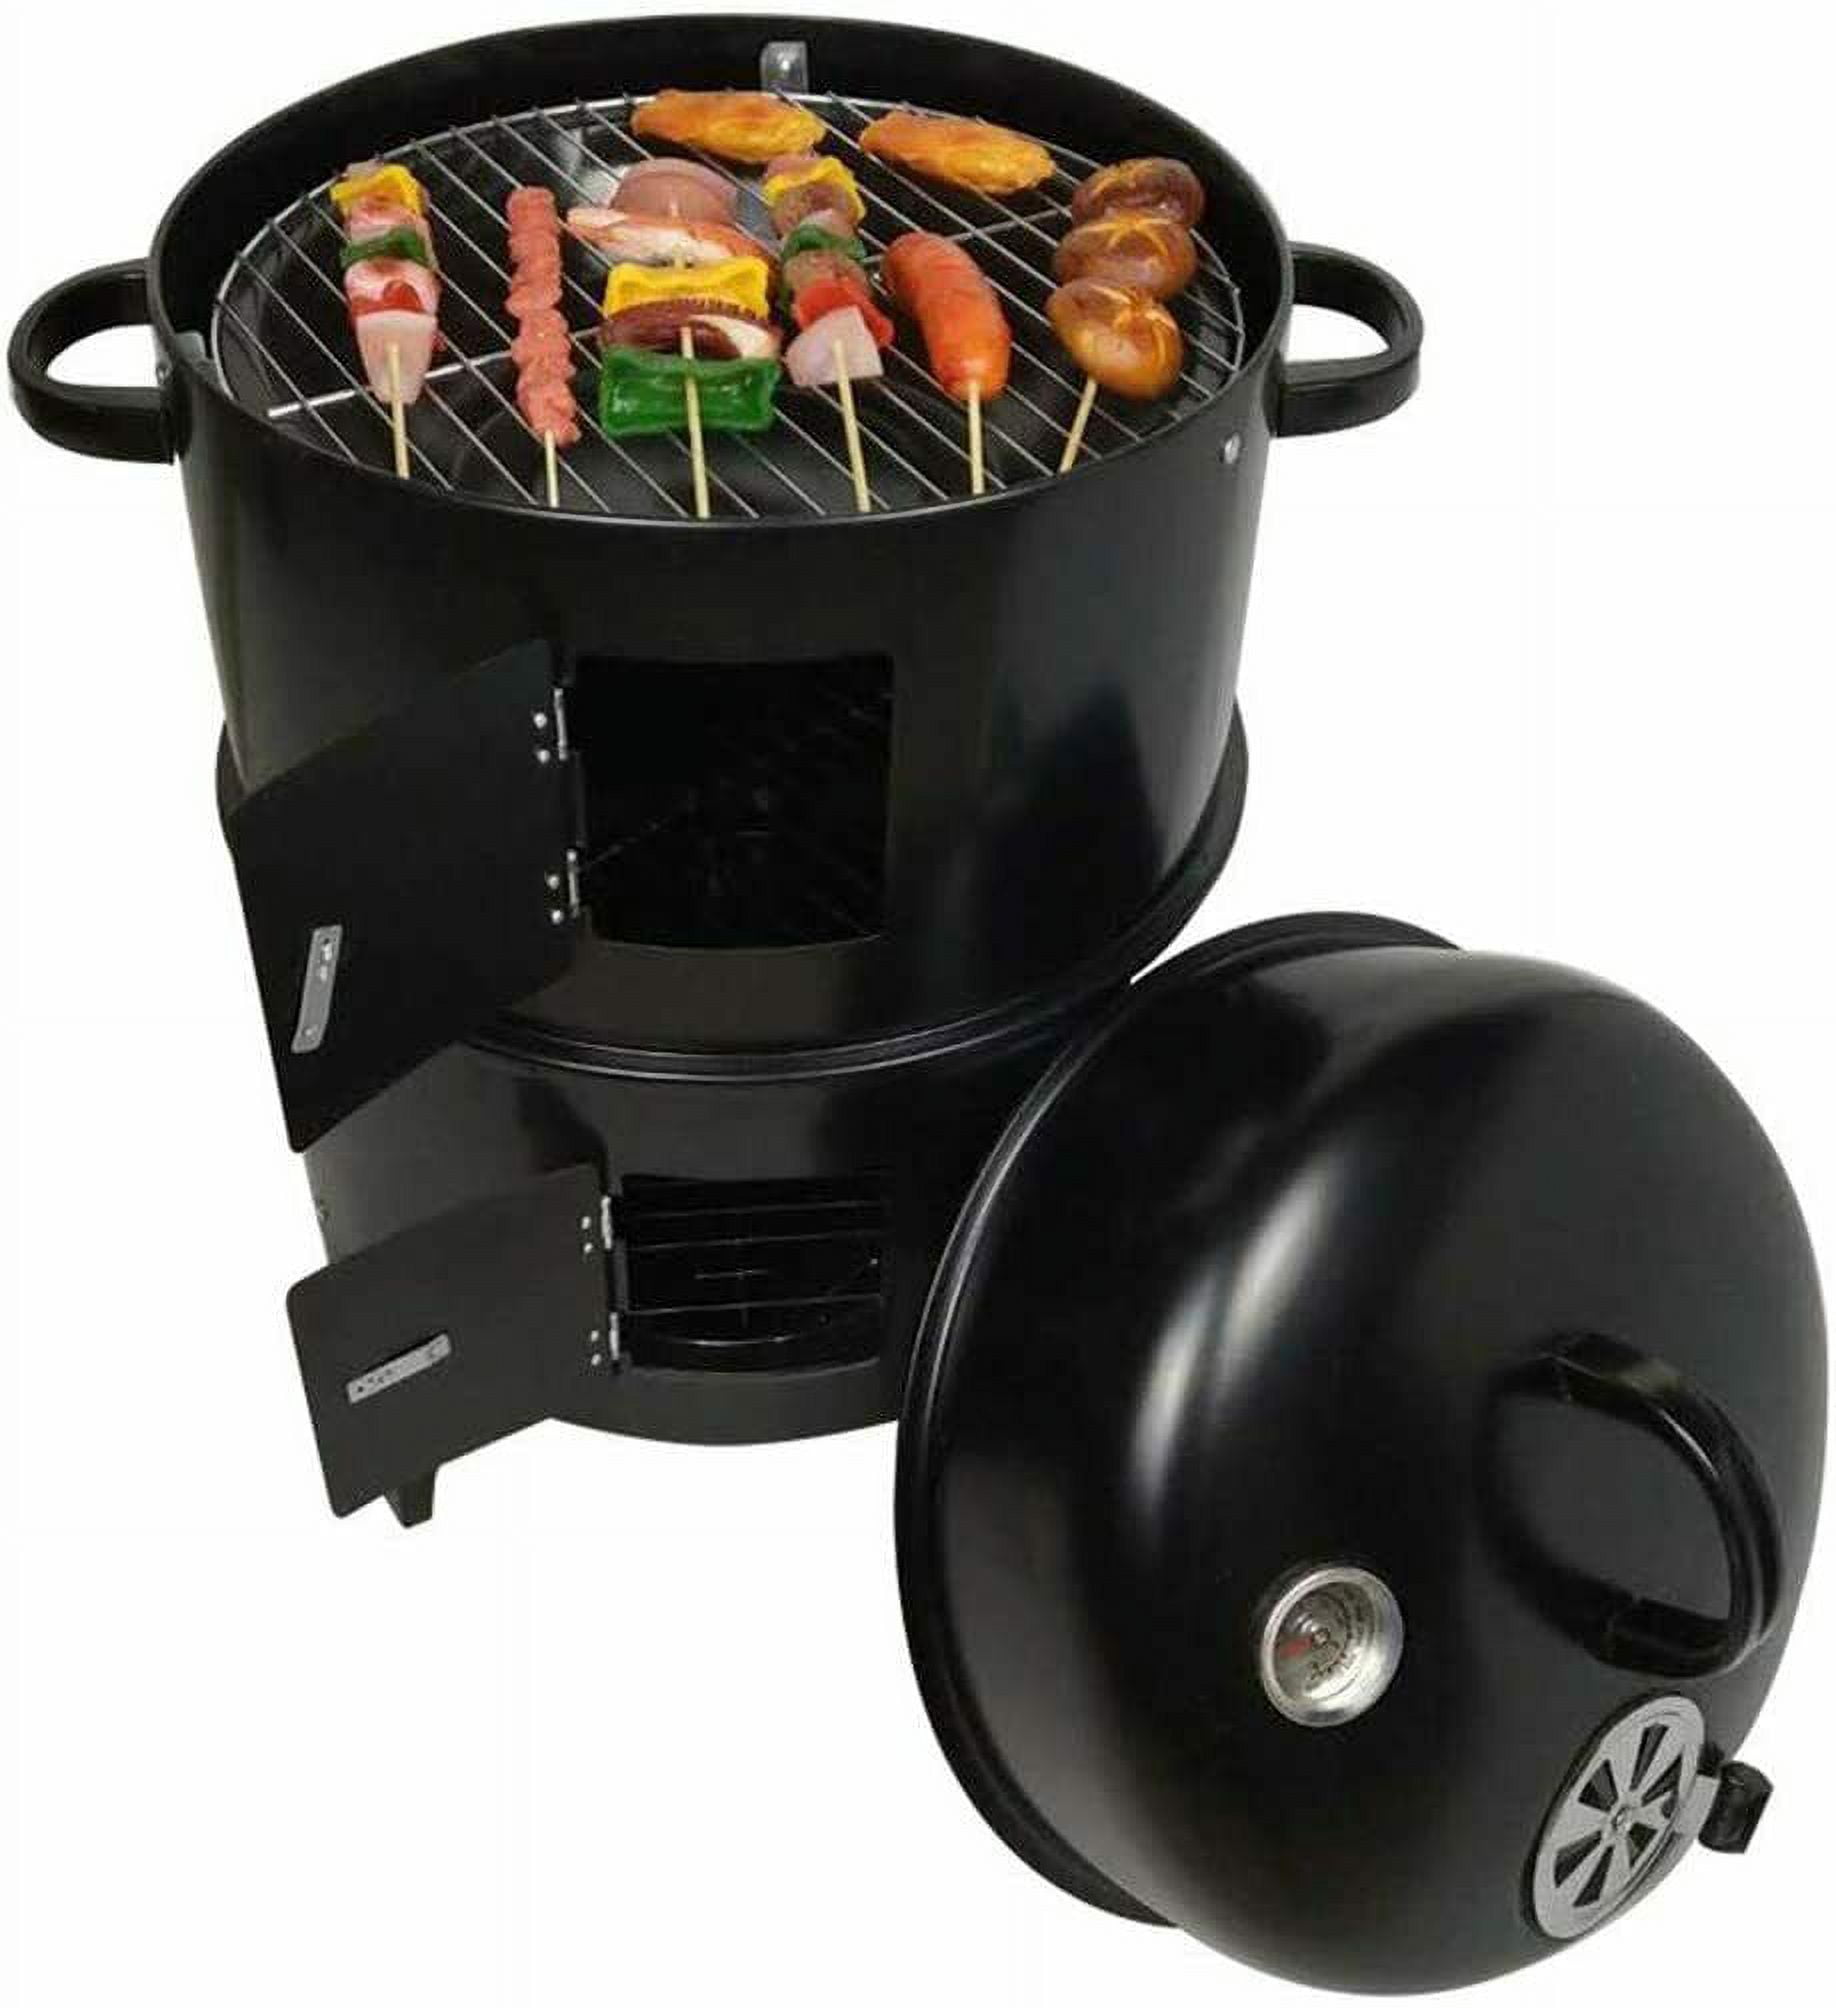 Grill Charcoal Grill Party Hiking Outdoor Smoker for Hunting Backyard Cooking Suitable Round Barbeque Vertical Family Smoker BBQ 3-in-1 3-Tier Grill Camping